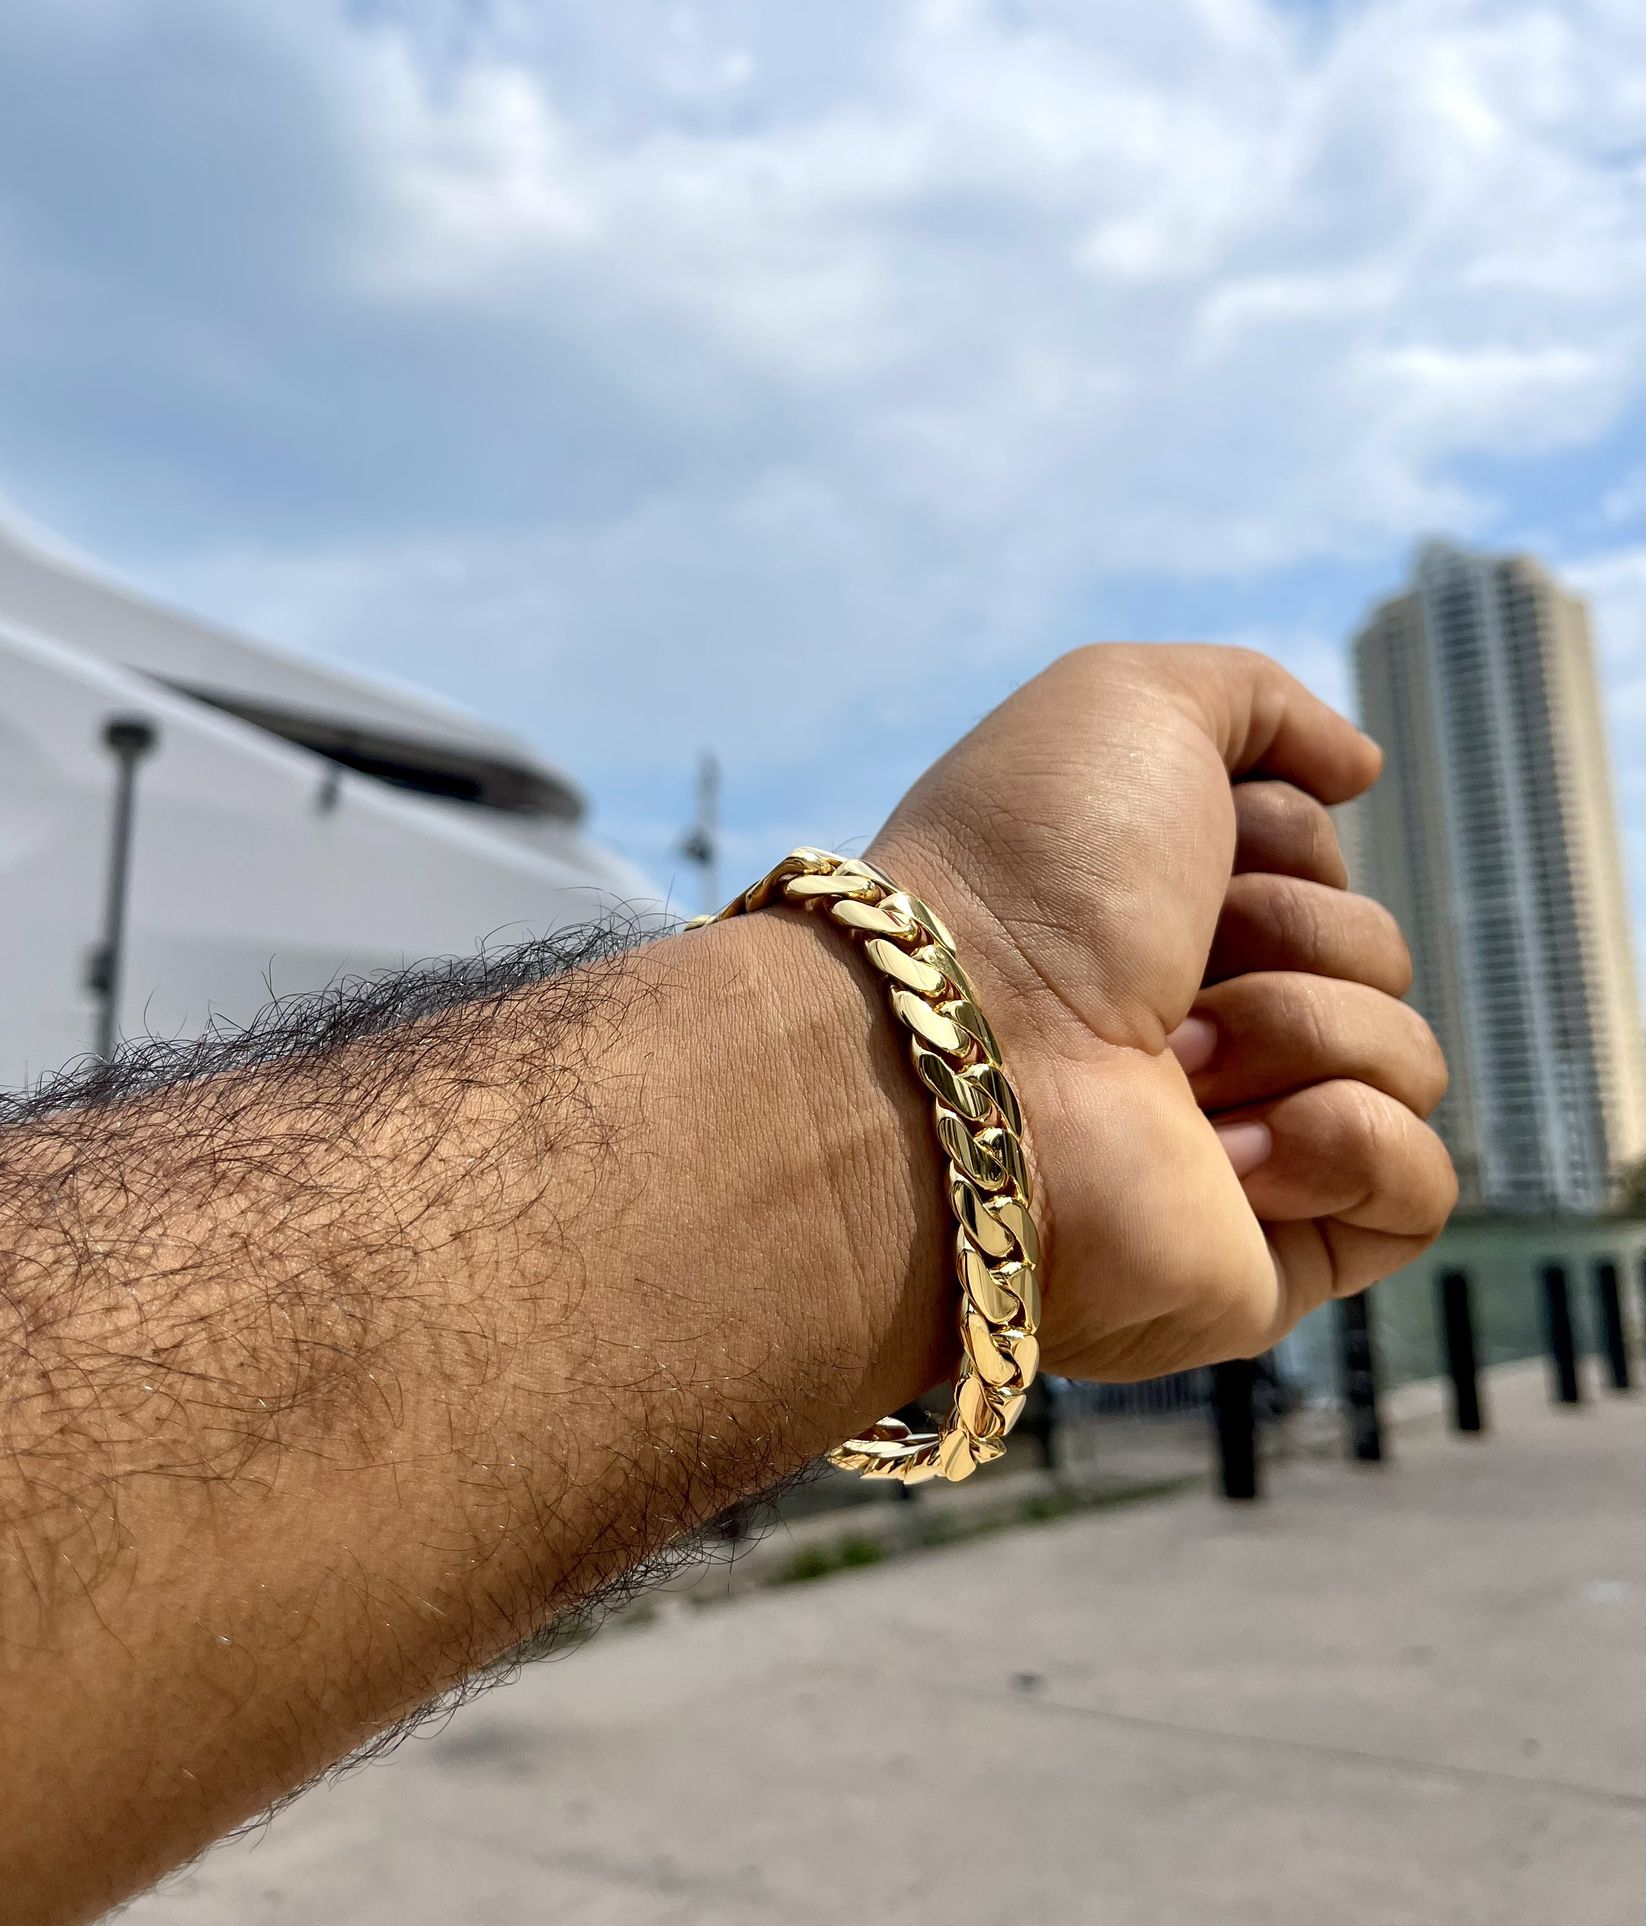 18mm 9” Miami Cuban Link Bracelet ress And Stretch By The Best In Downtown  Miami (Gold14k) Over Silver for Sale in Miami, FL - OfferUp